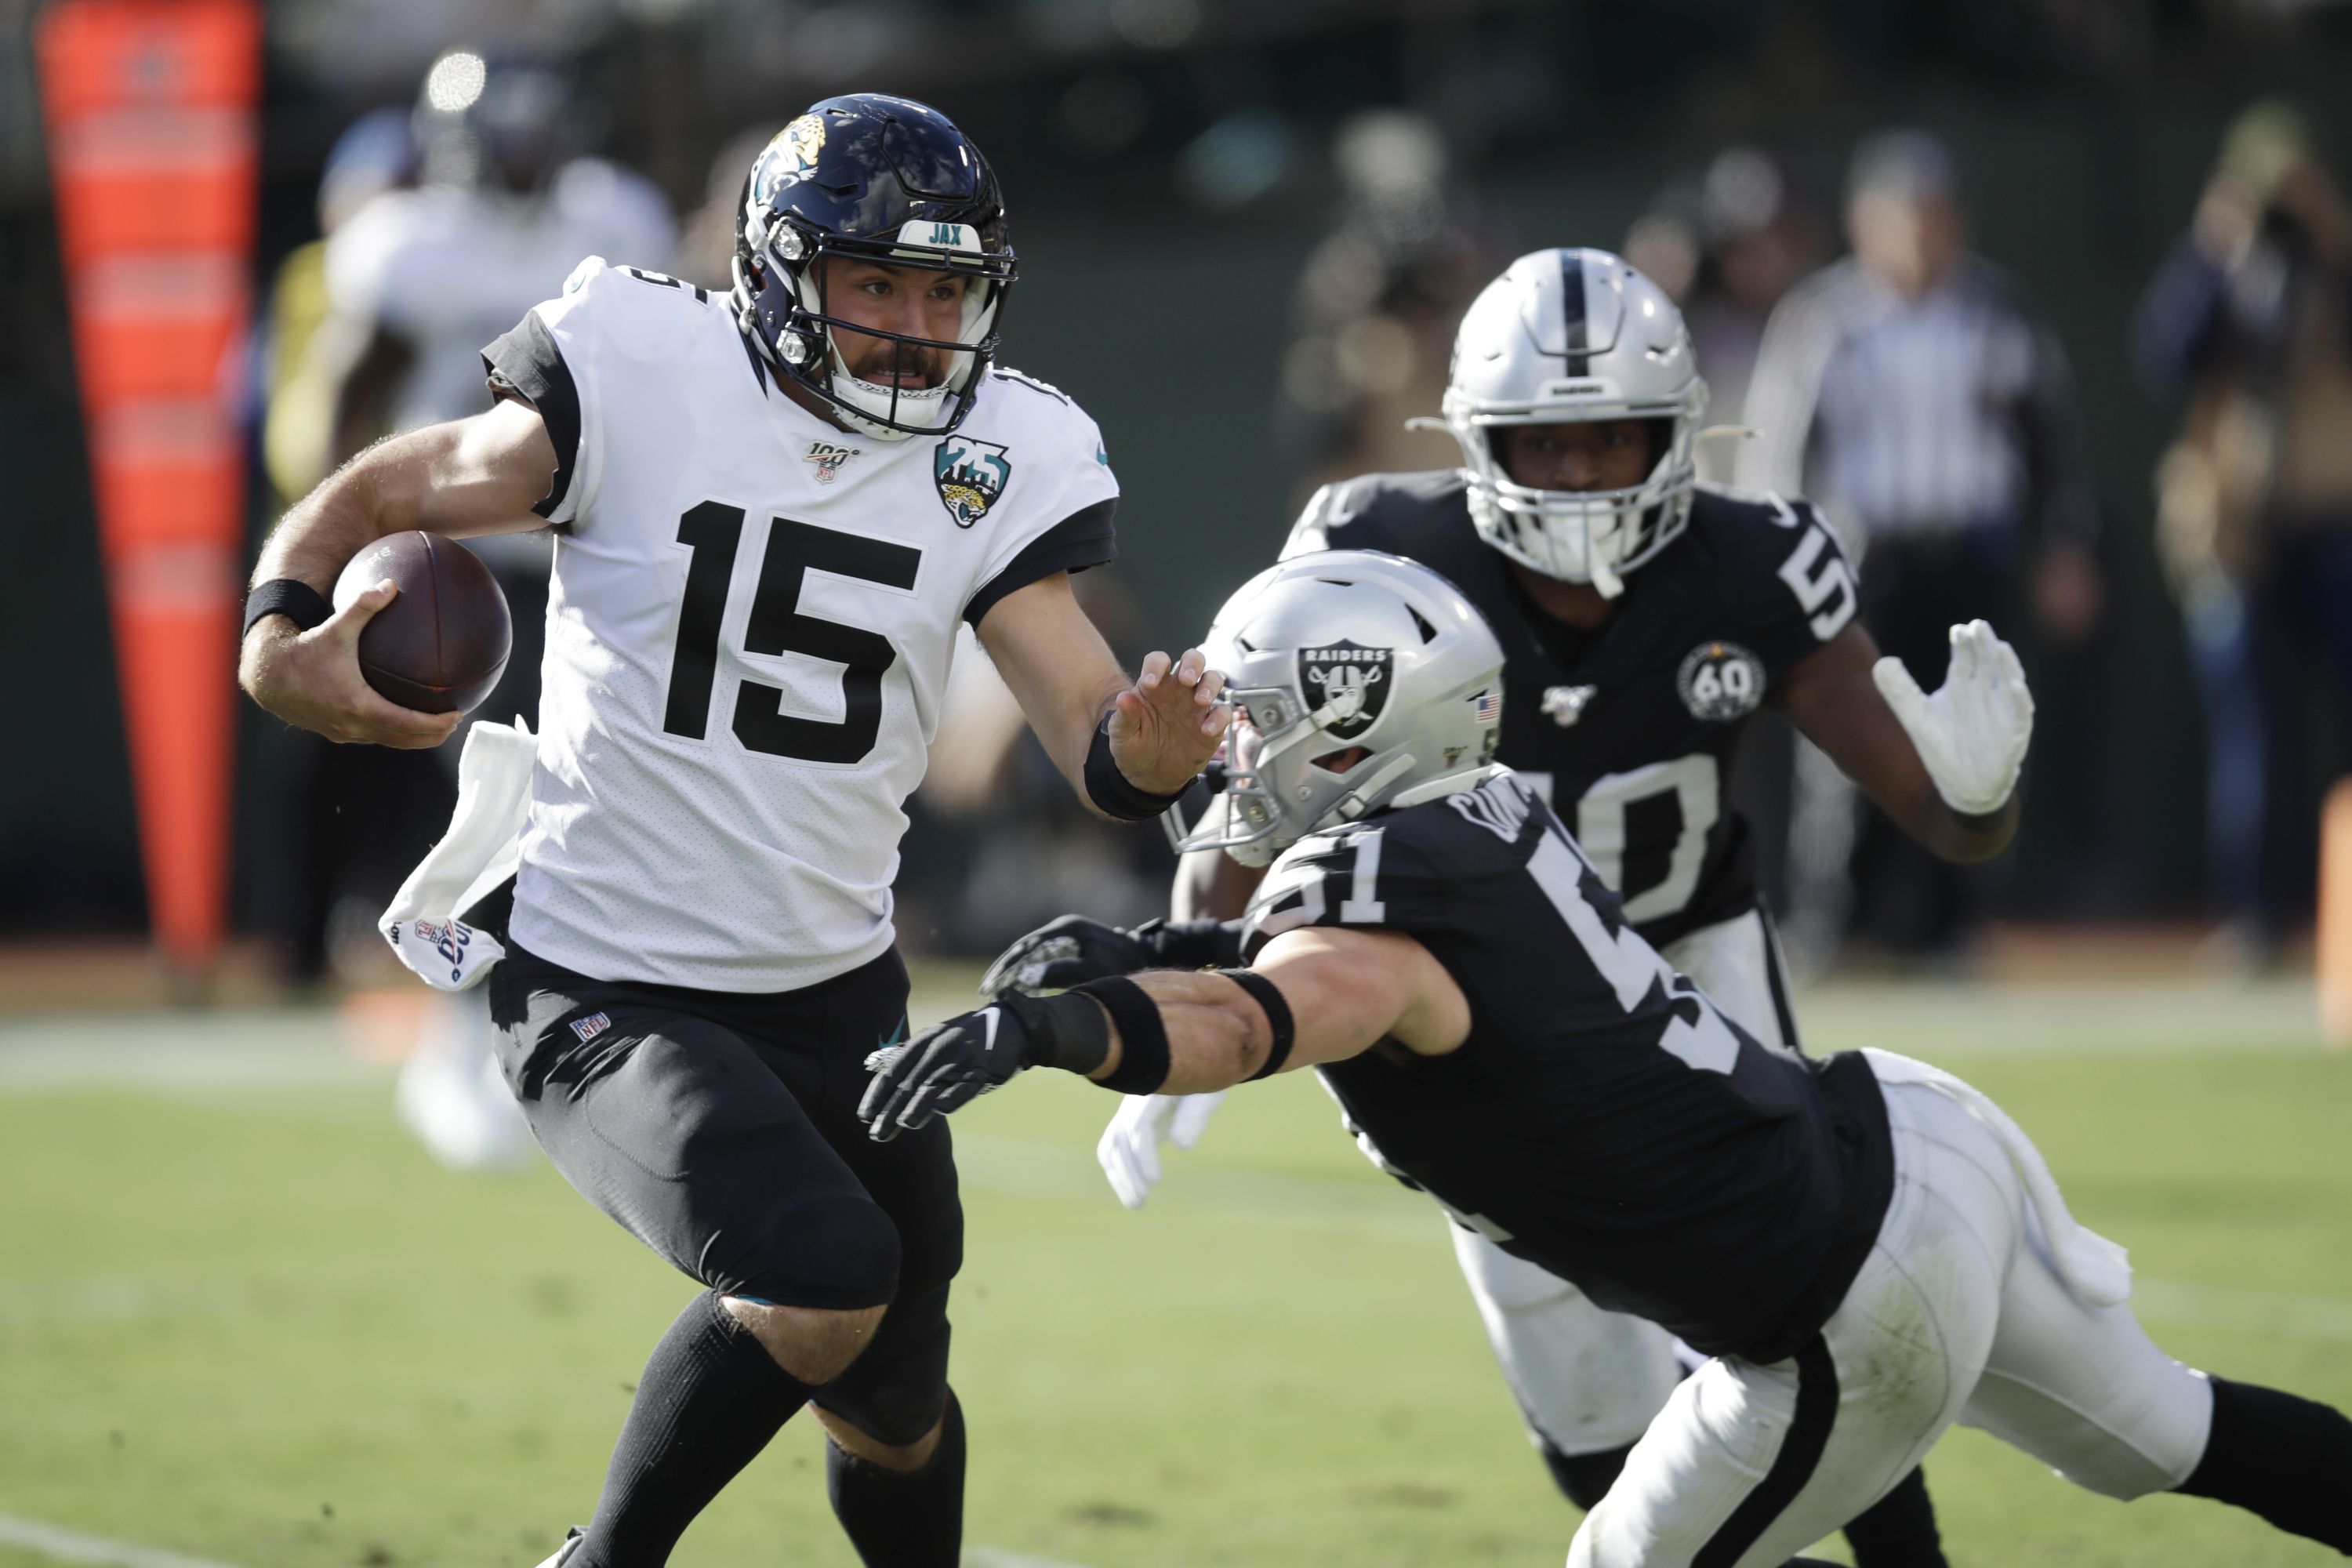 Oakland Raiders lose to the Jacksonville Jaguars in final home